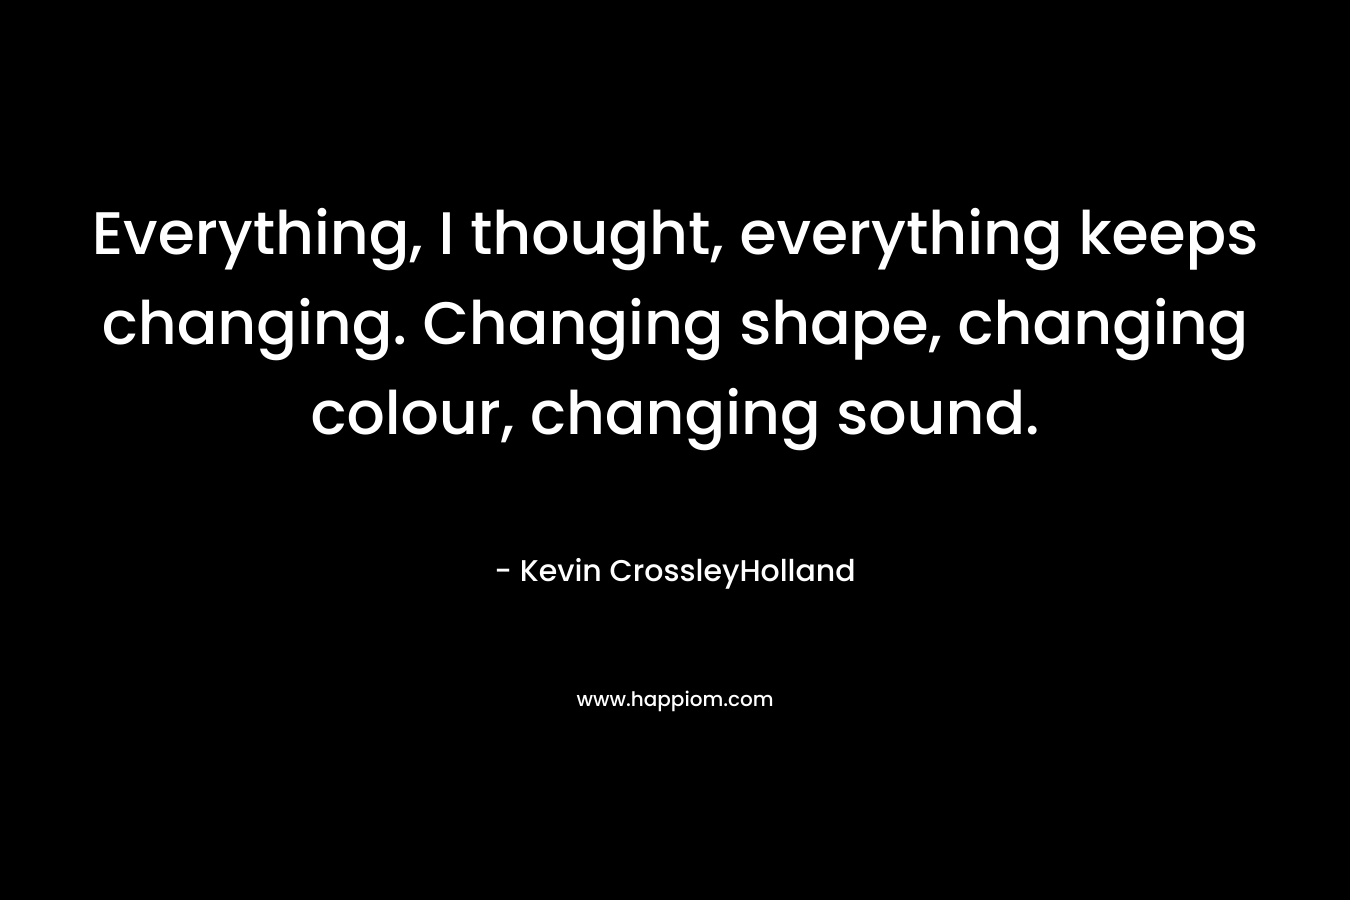 Everything, I thought, everything keeps changing. Changing shape, changing colour, changing sound.